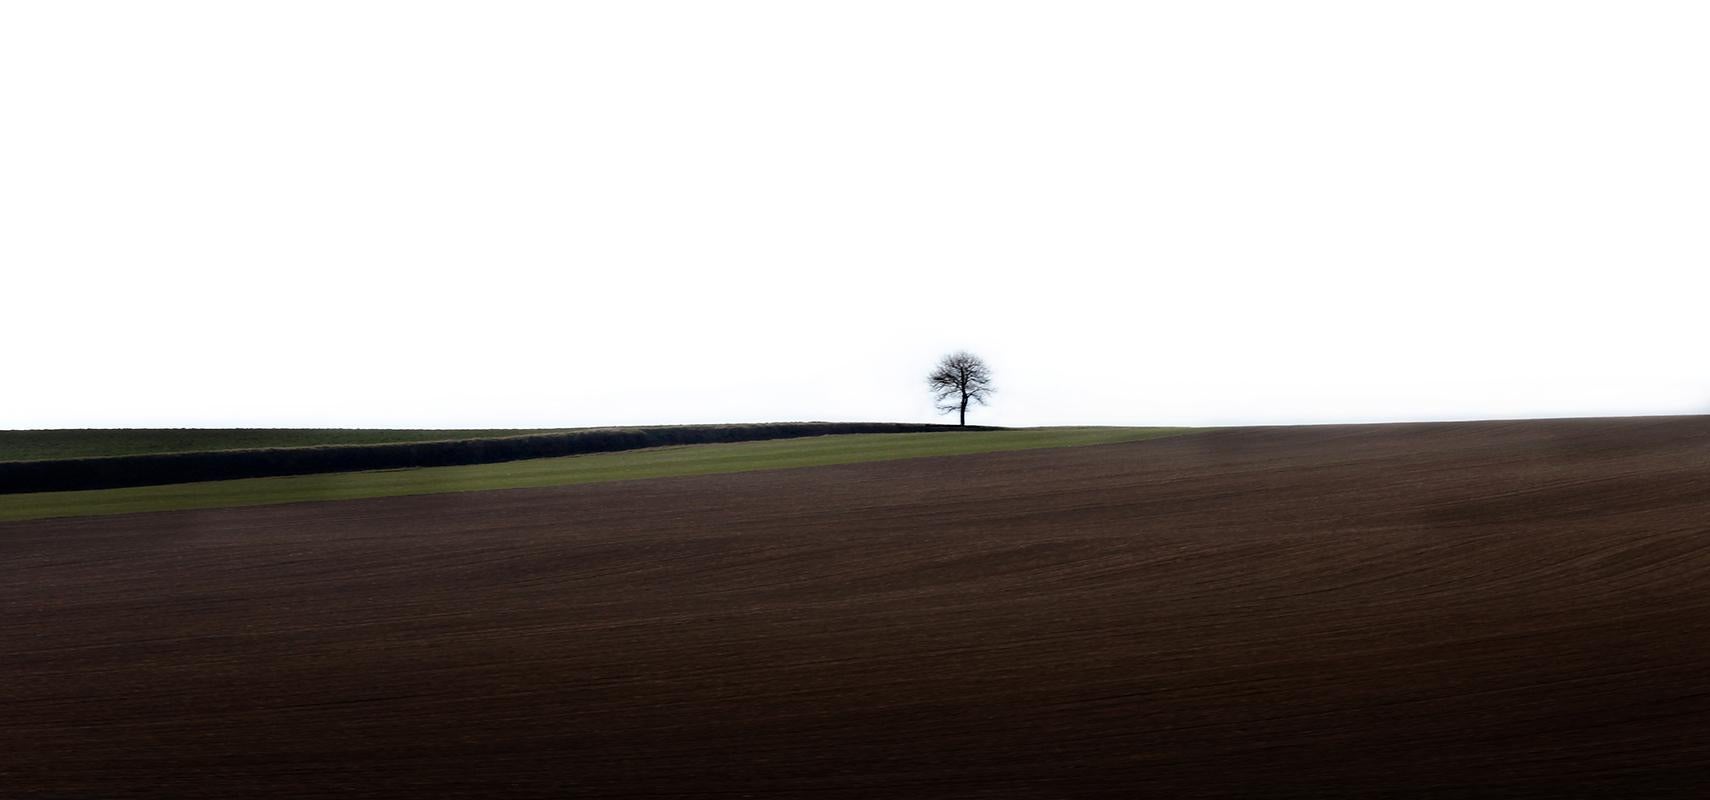 Loneliness- Signed limited edition nature print, Tree, Field, Green panorama - Black Color Photograph by Laurent Campus